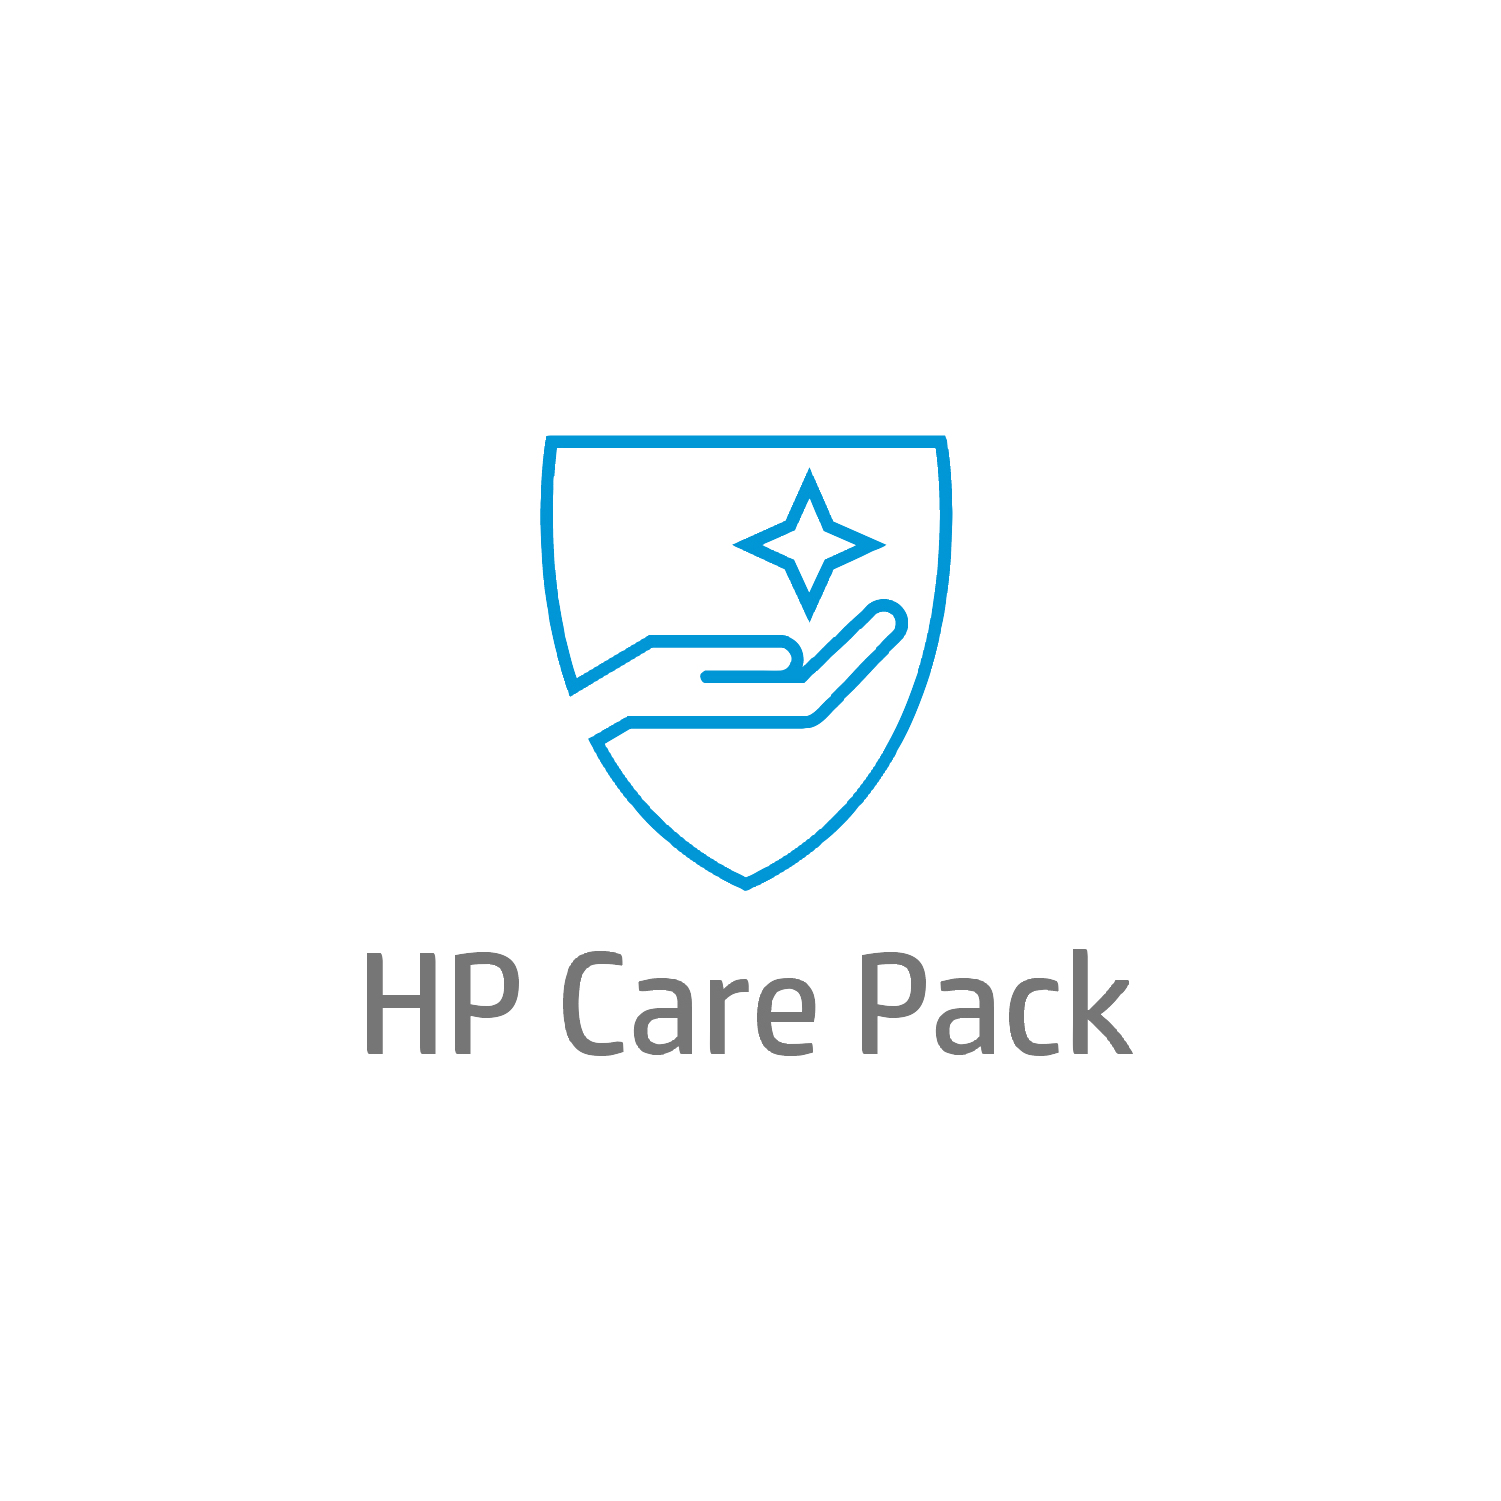 HP 2 year Care Pack w/Standard Exchange for Multifunction Printers